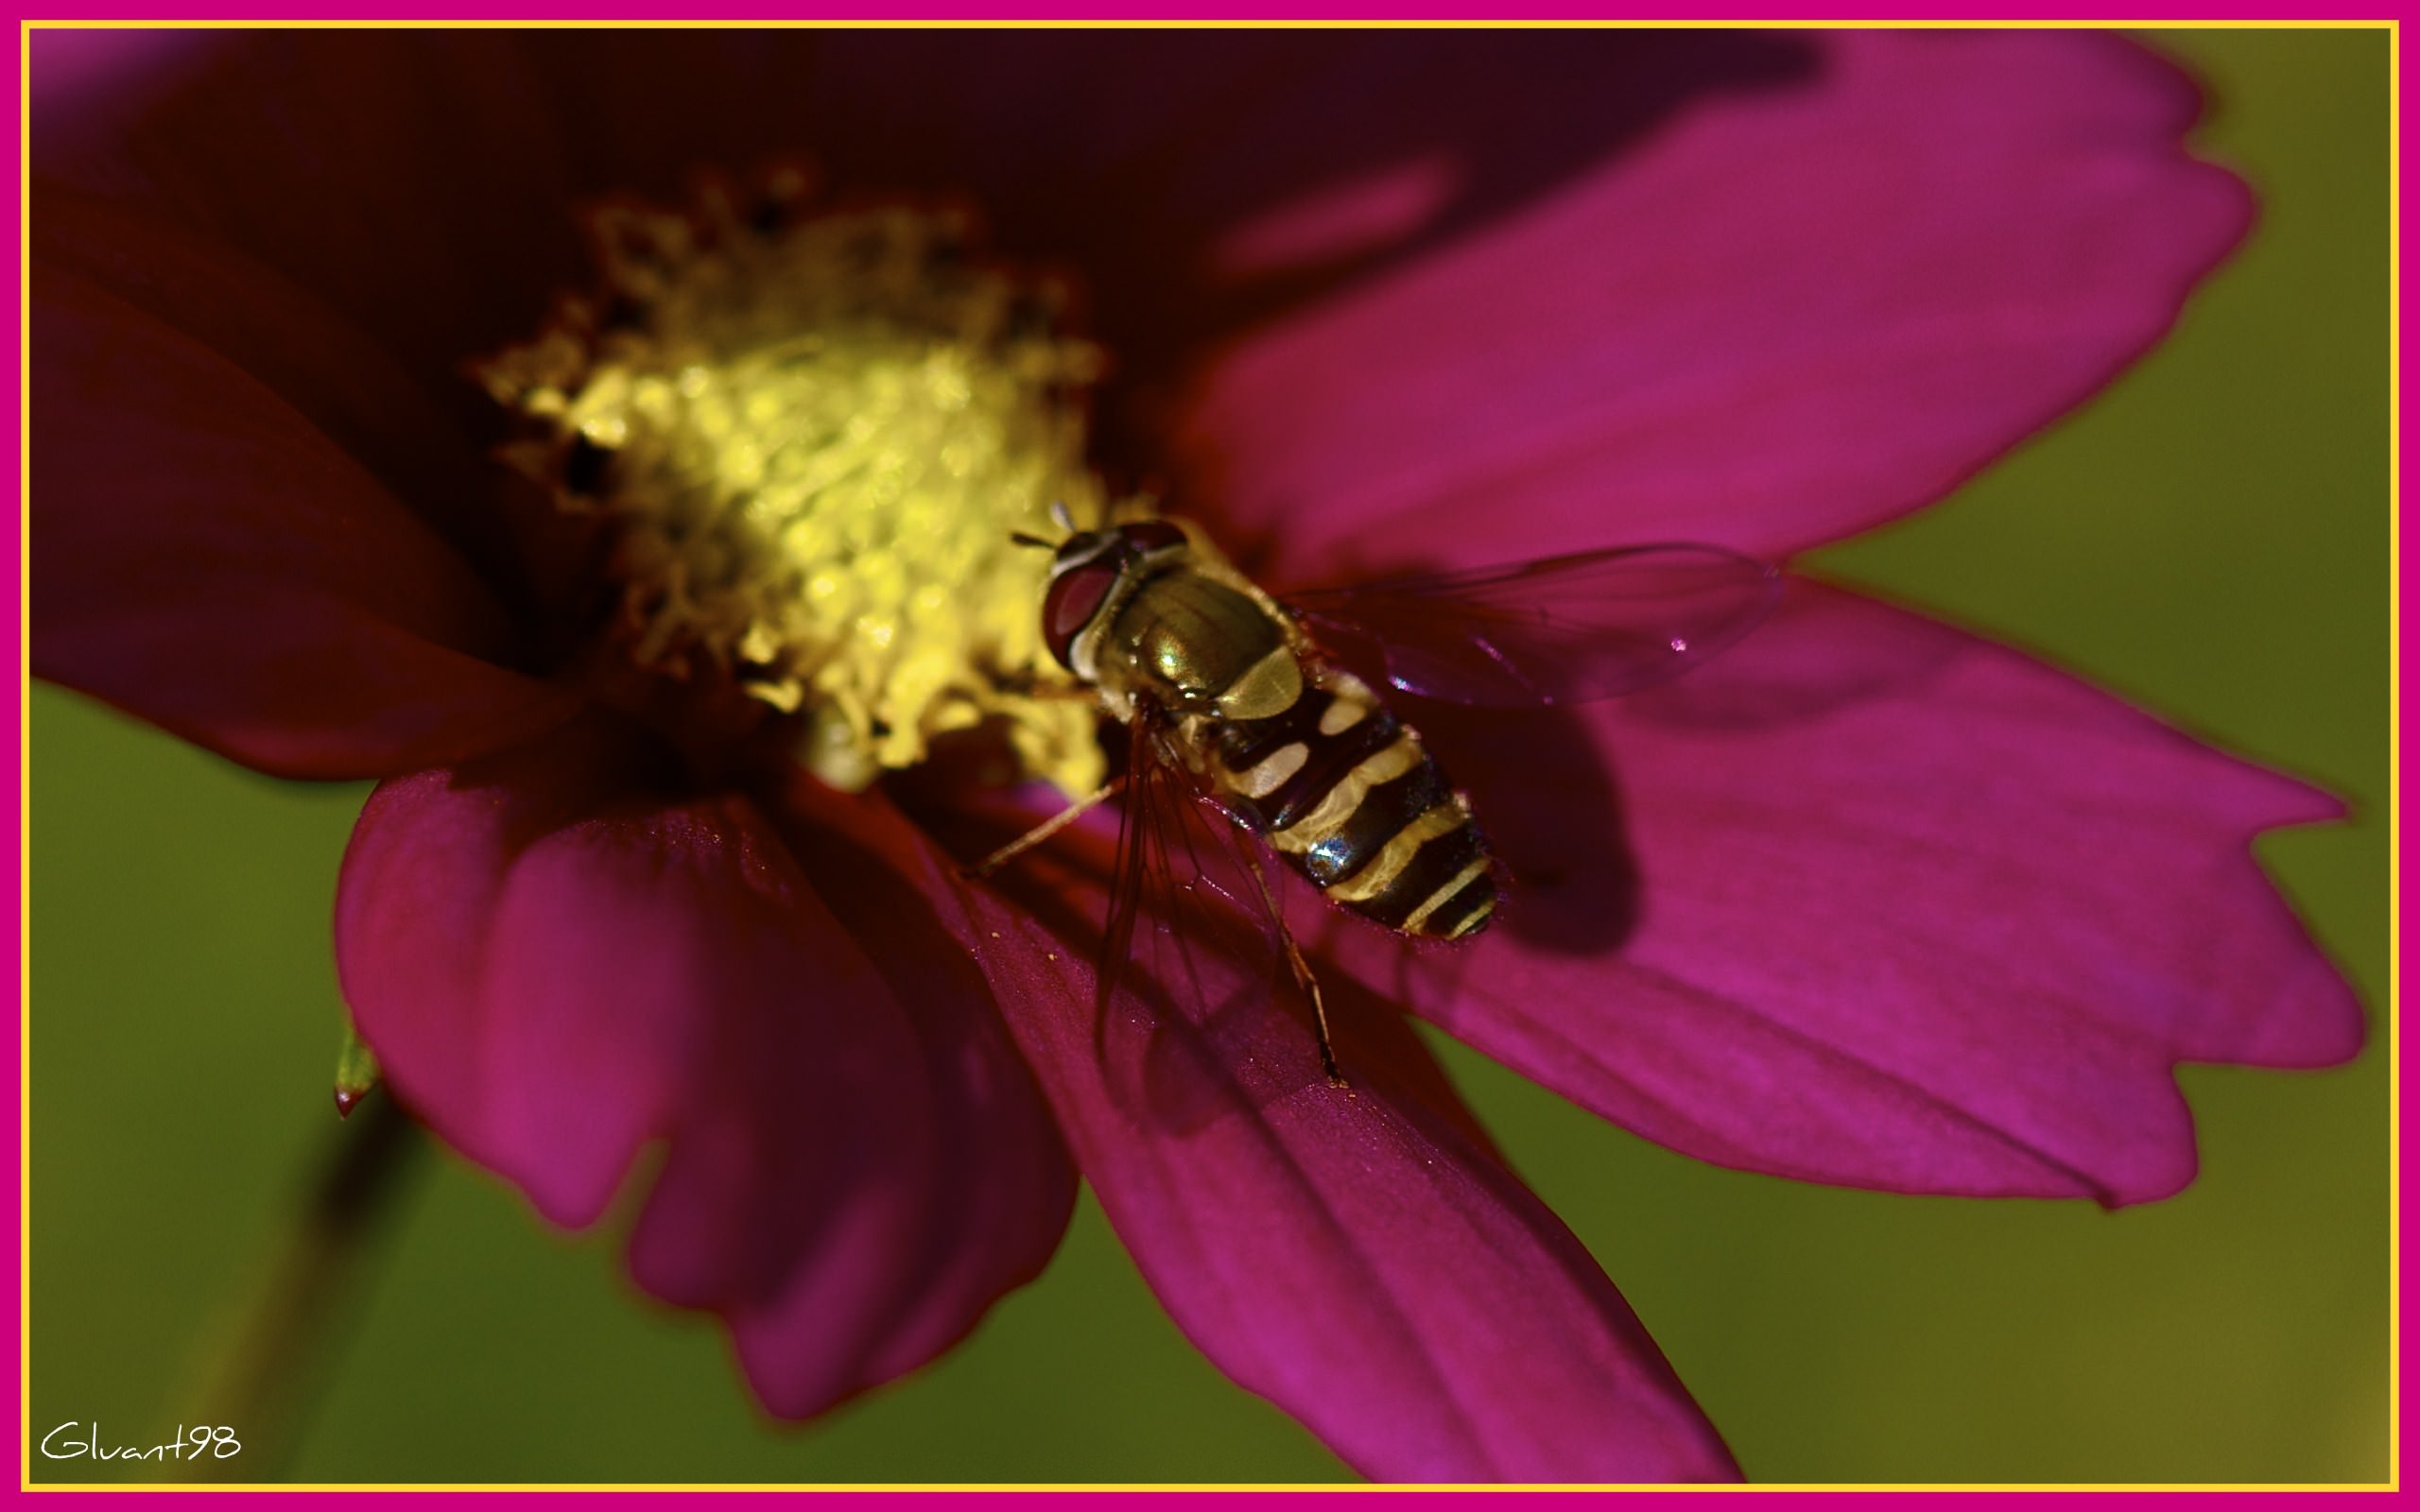 Abeilles Guepes Mmm le nectar !!!